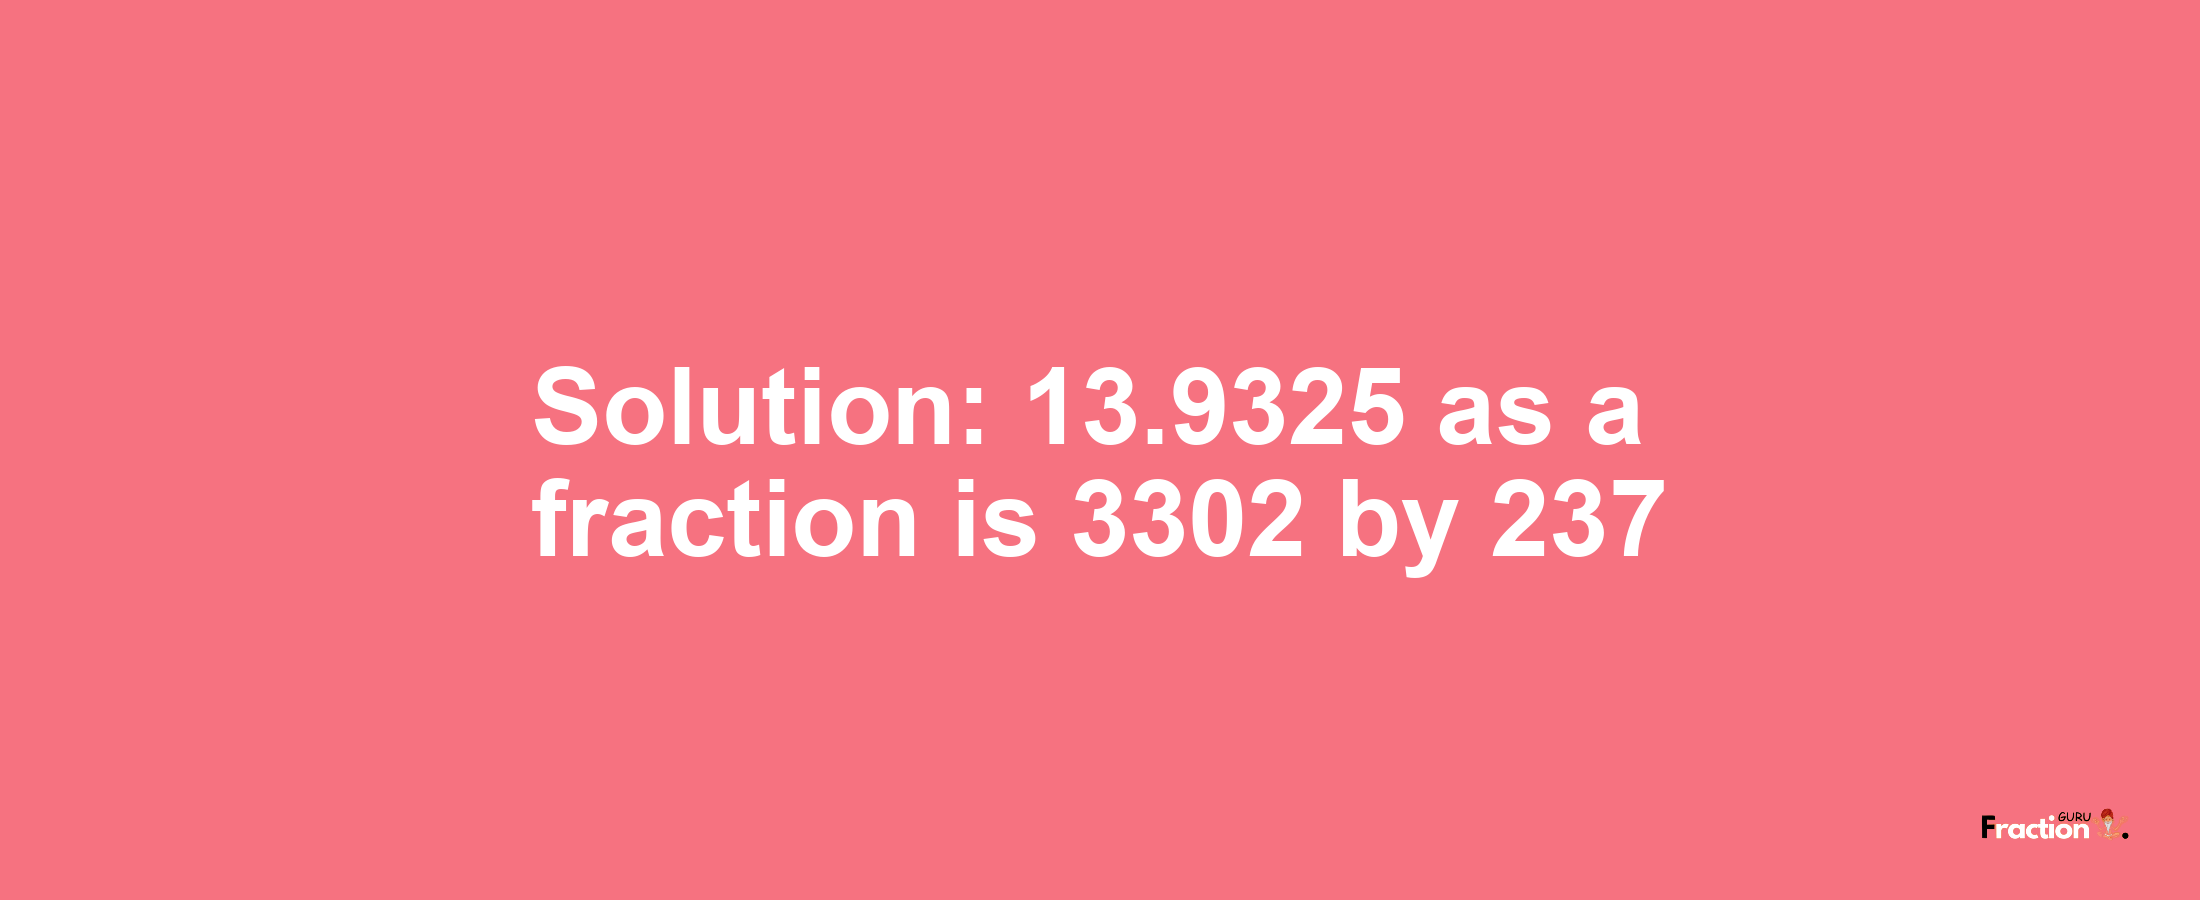 Solution:13.9325 as a fraction is 3302/237